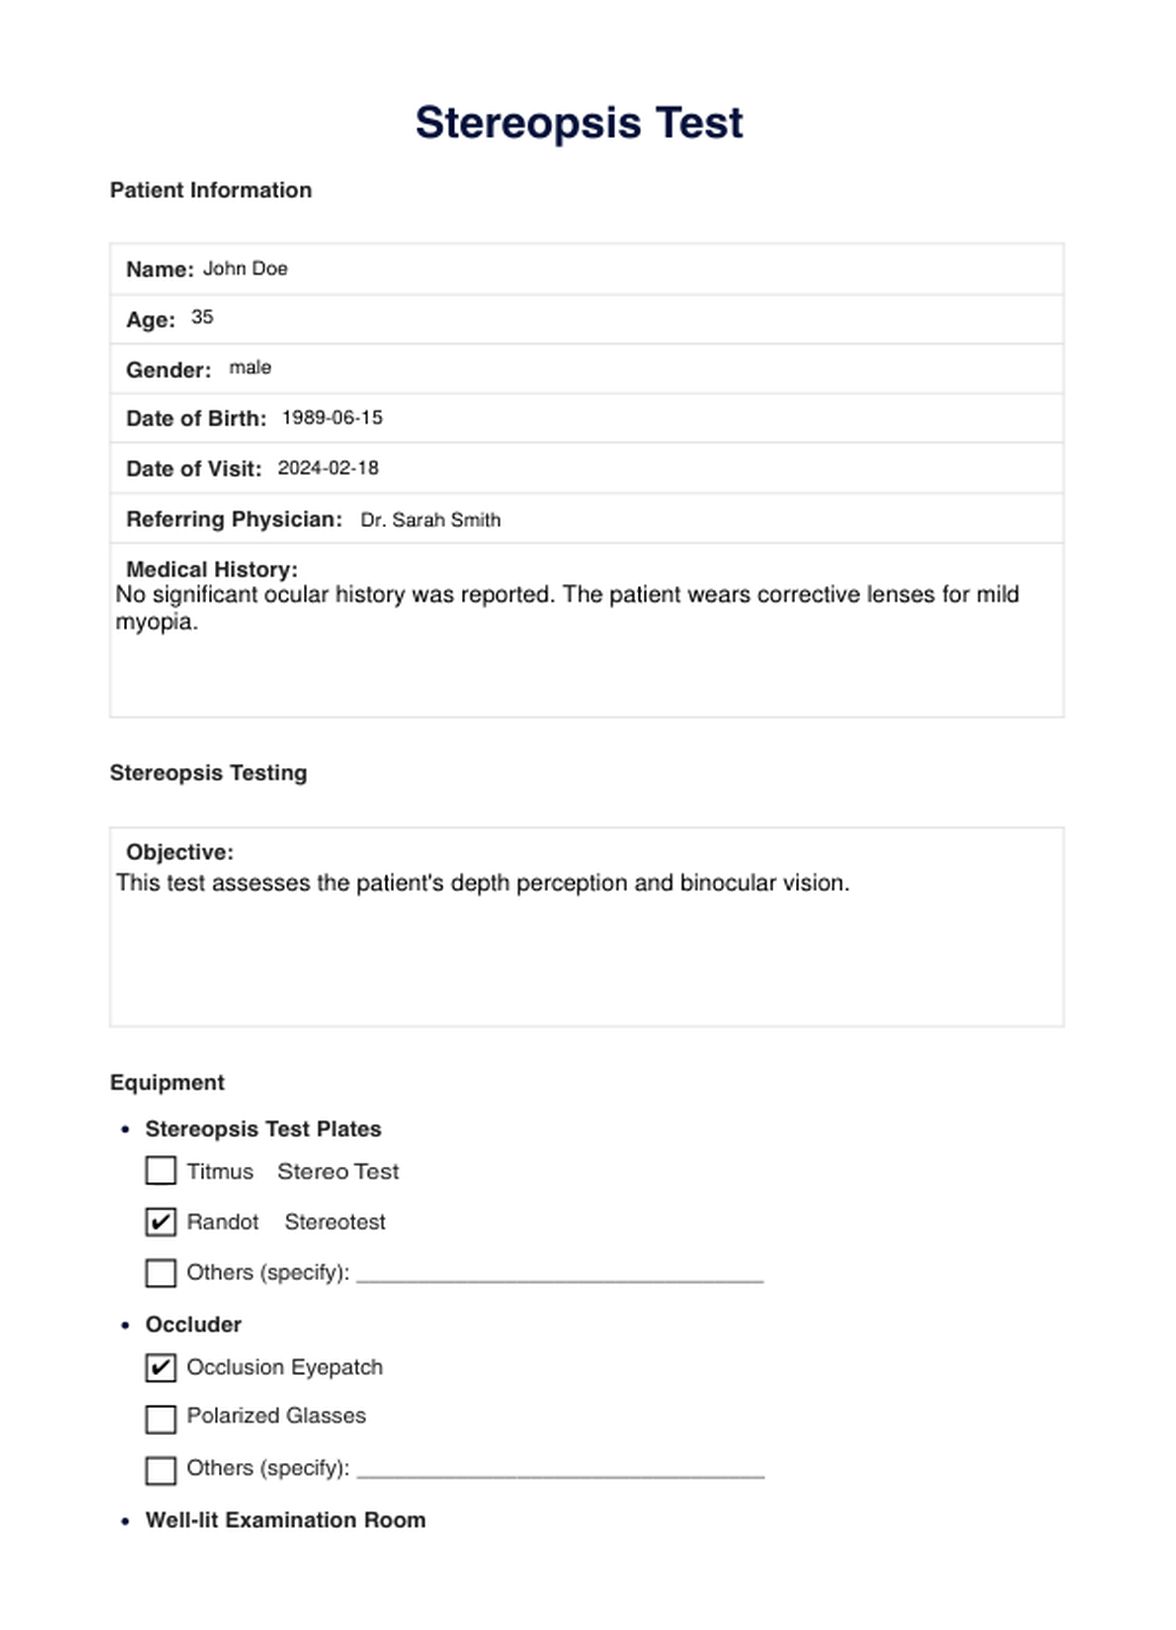 Stereopsis Test PDF Example